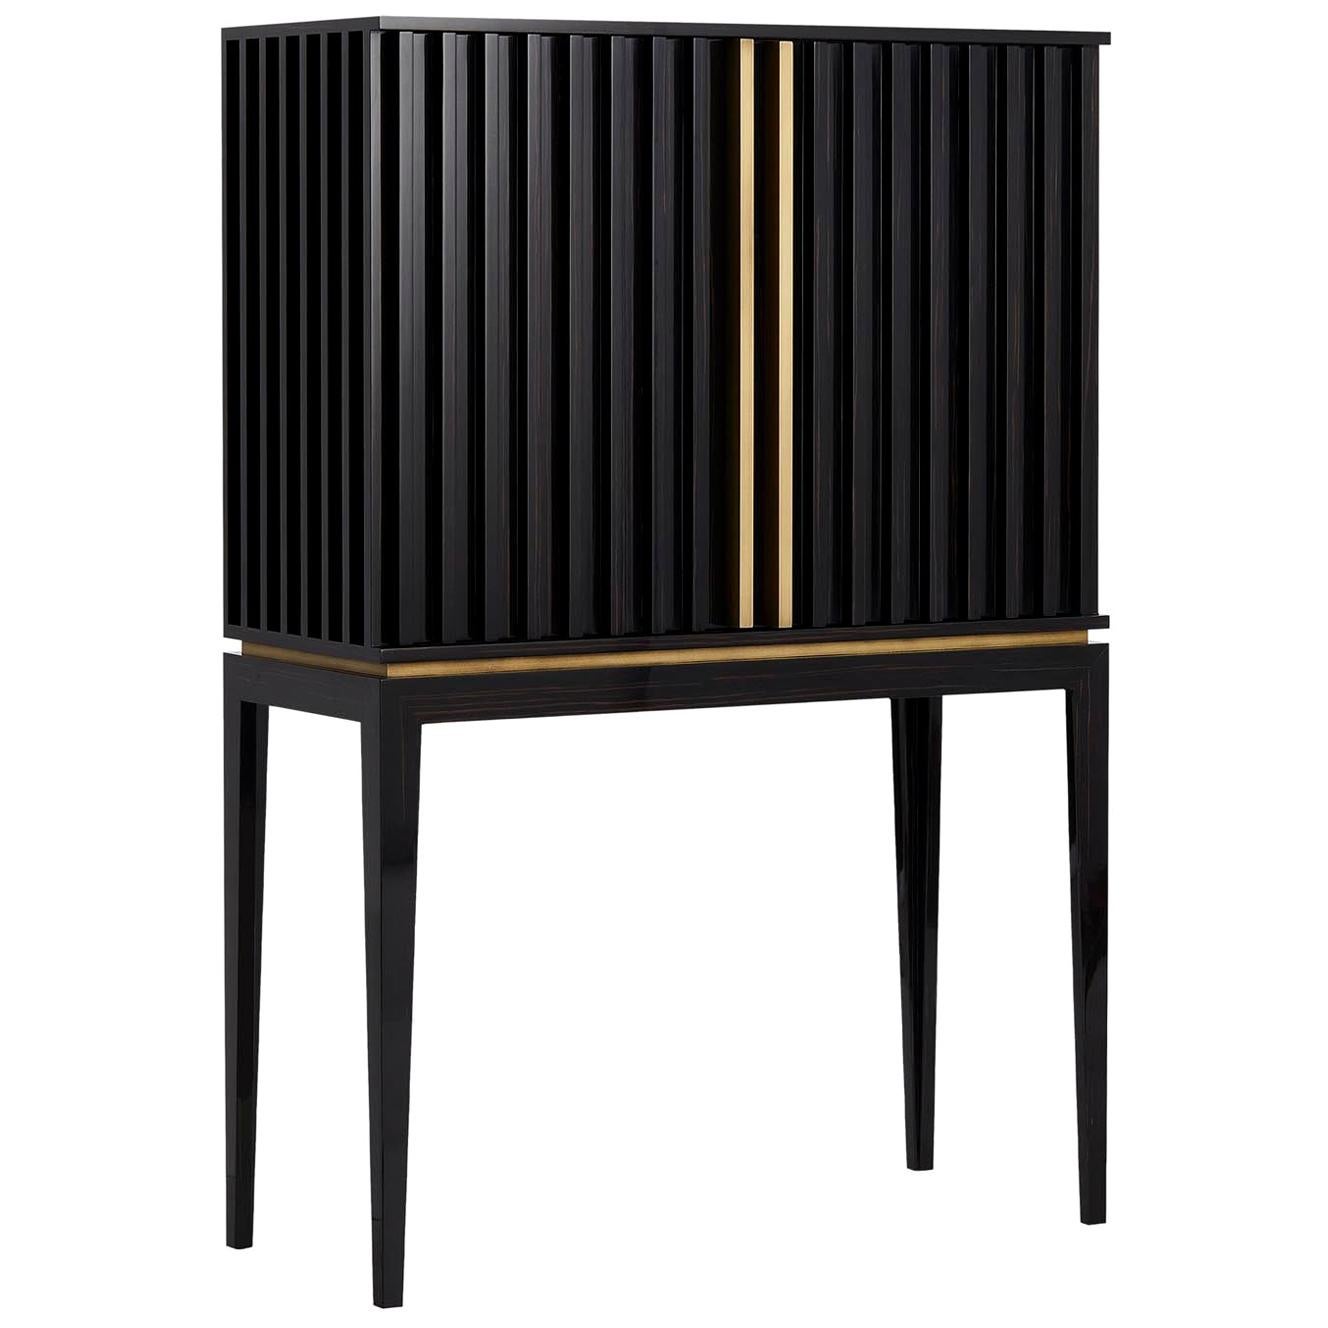 RELEVO Bar Cabinet in Ebony Makassar Structure and Antique Brass Handles